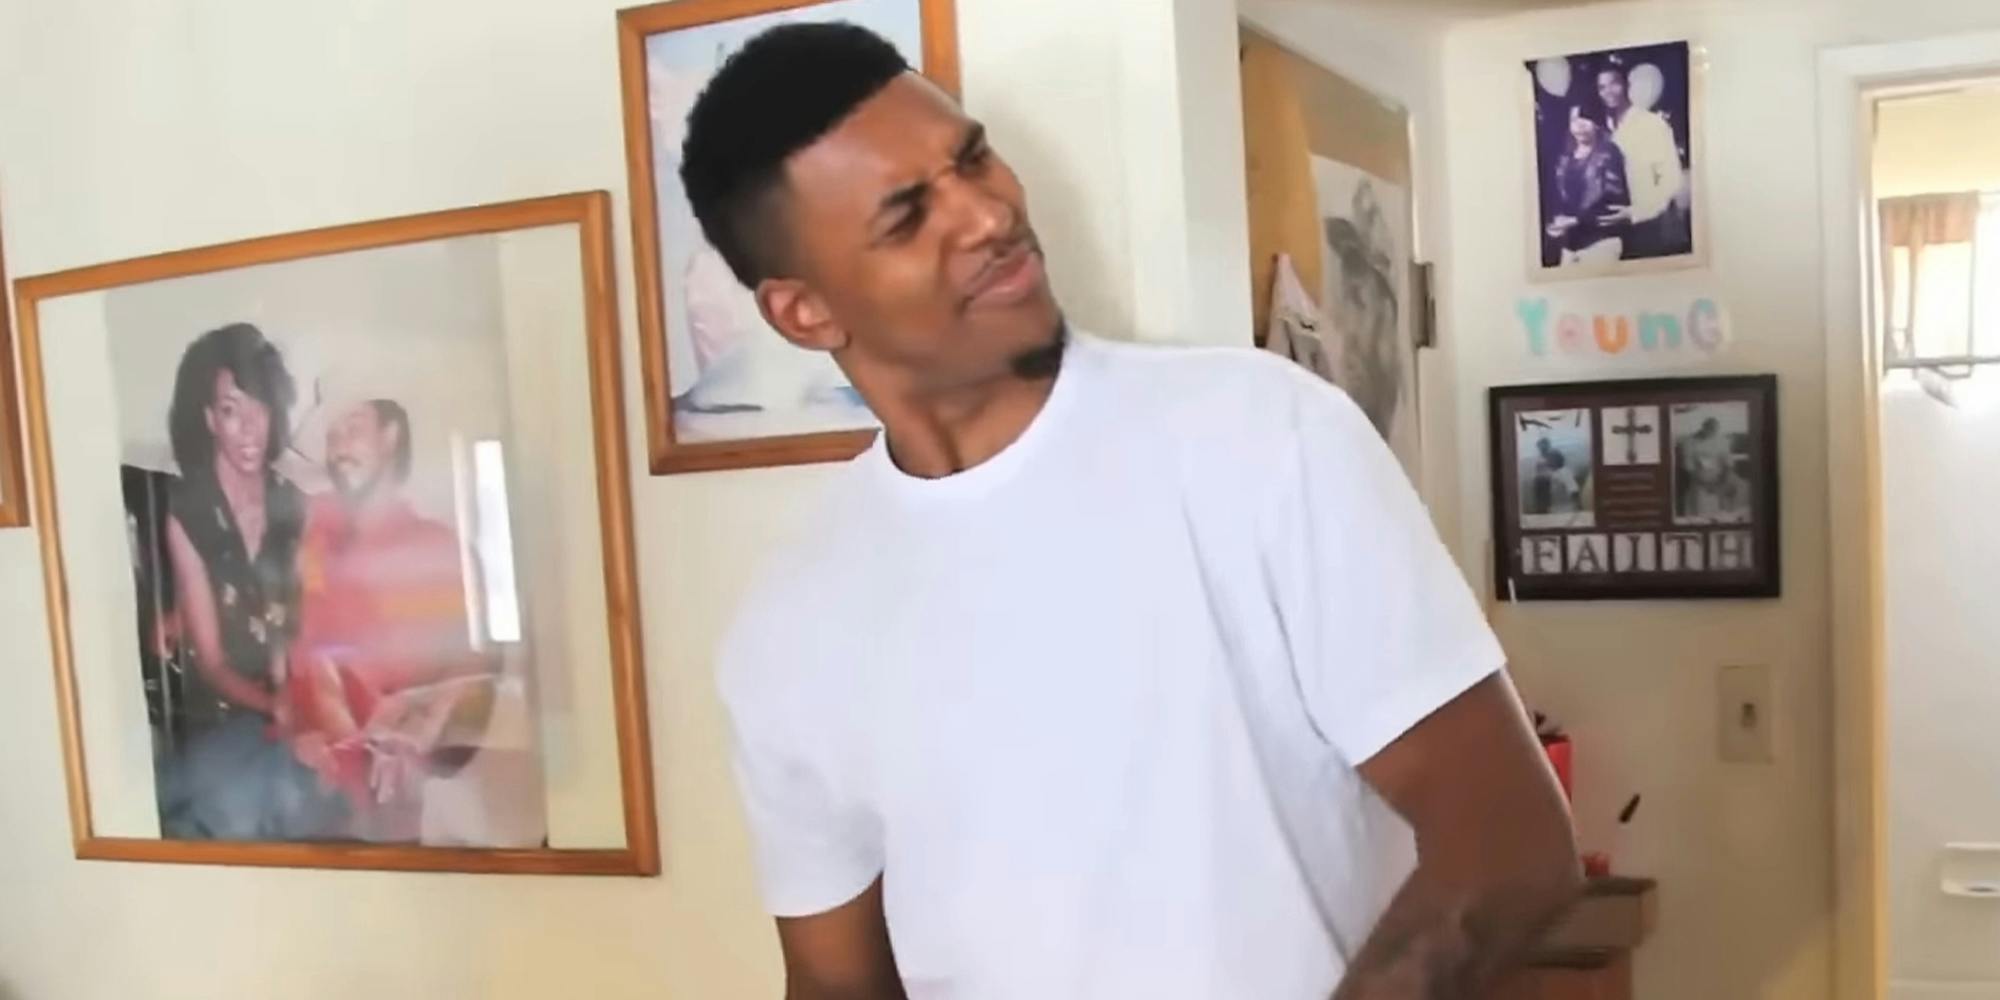 The 'Confused' or 'Confused Nick Young' meme